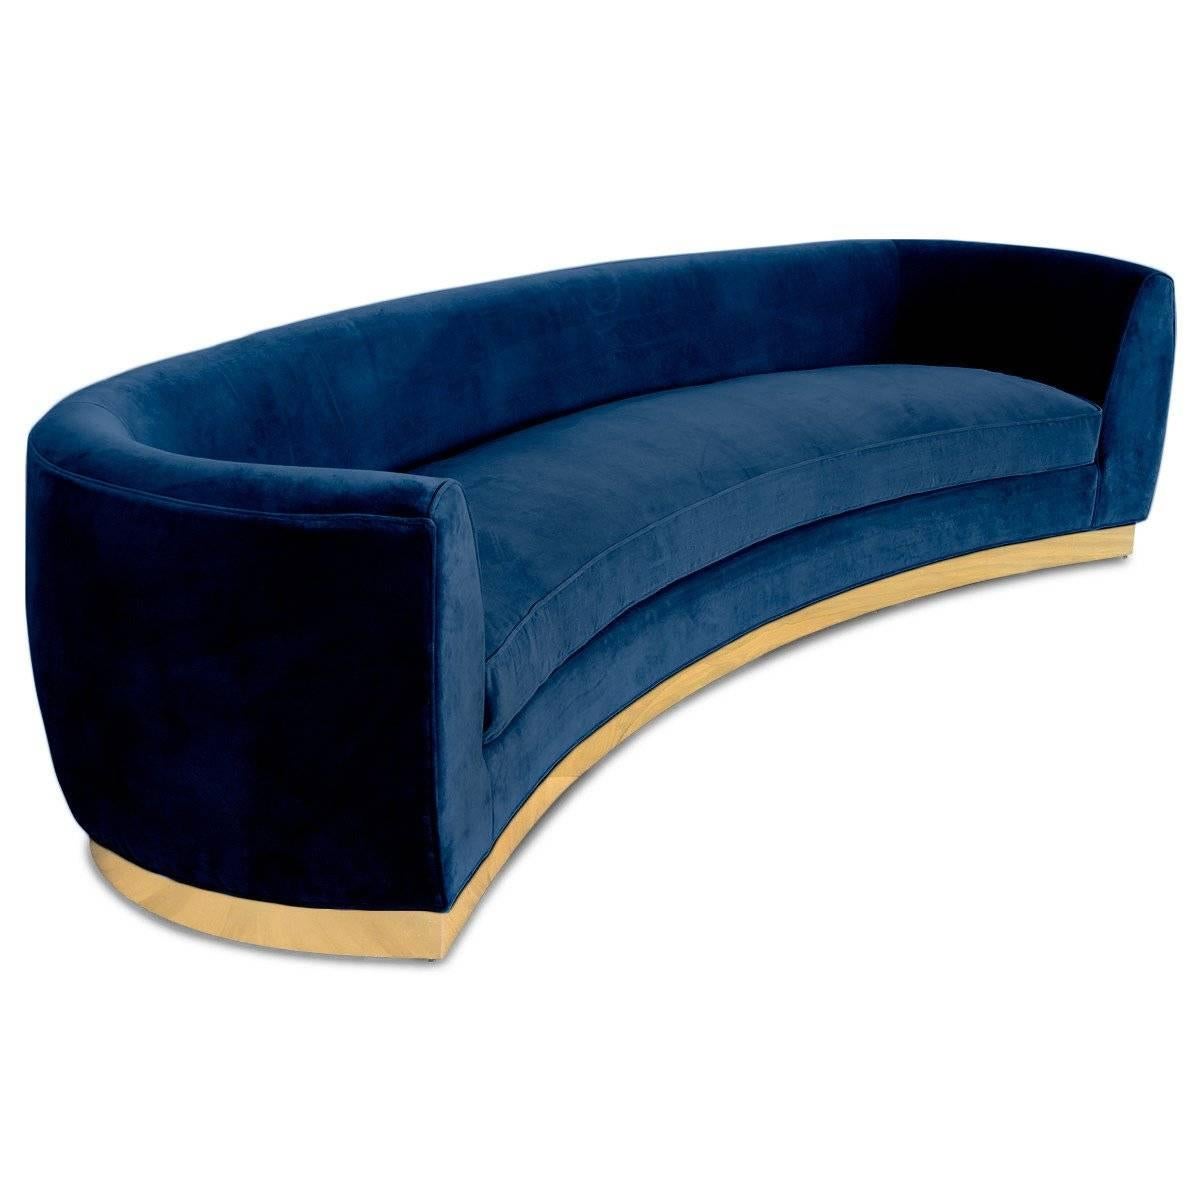 Art Deco Style Curved Sofa in Velvet Upholstery with Brass Toe-kick Base 10 foot For Sale 8